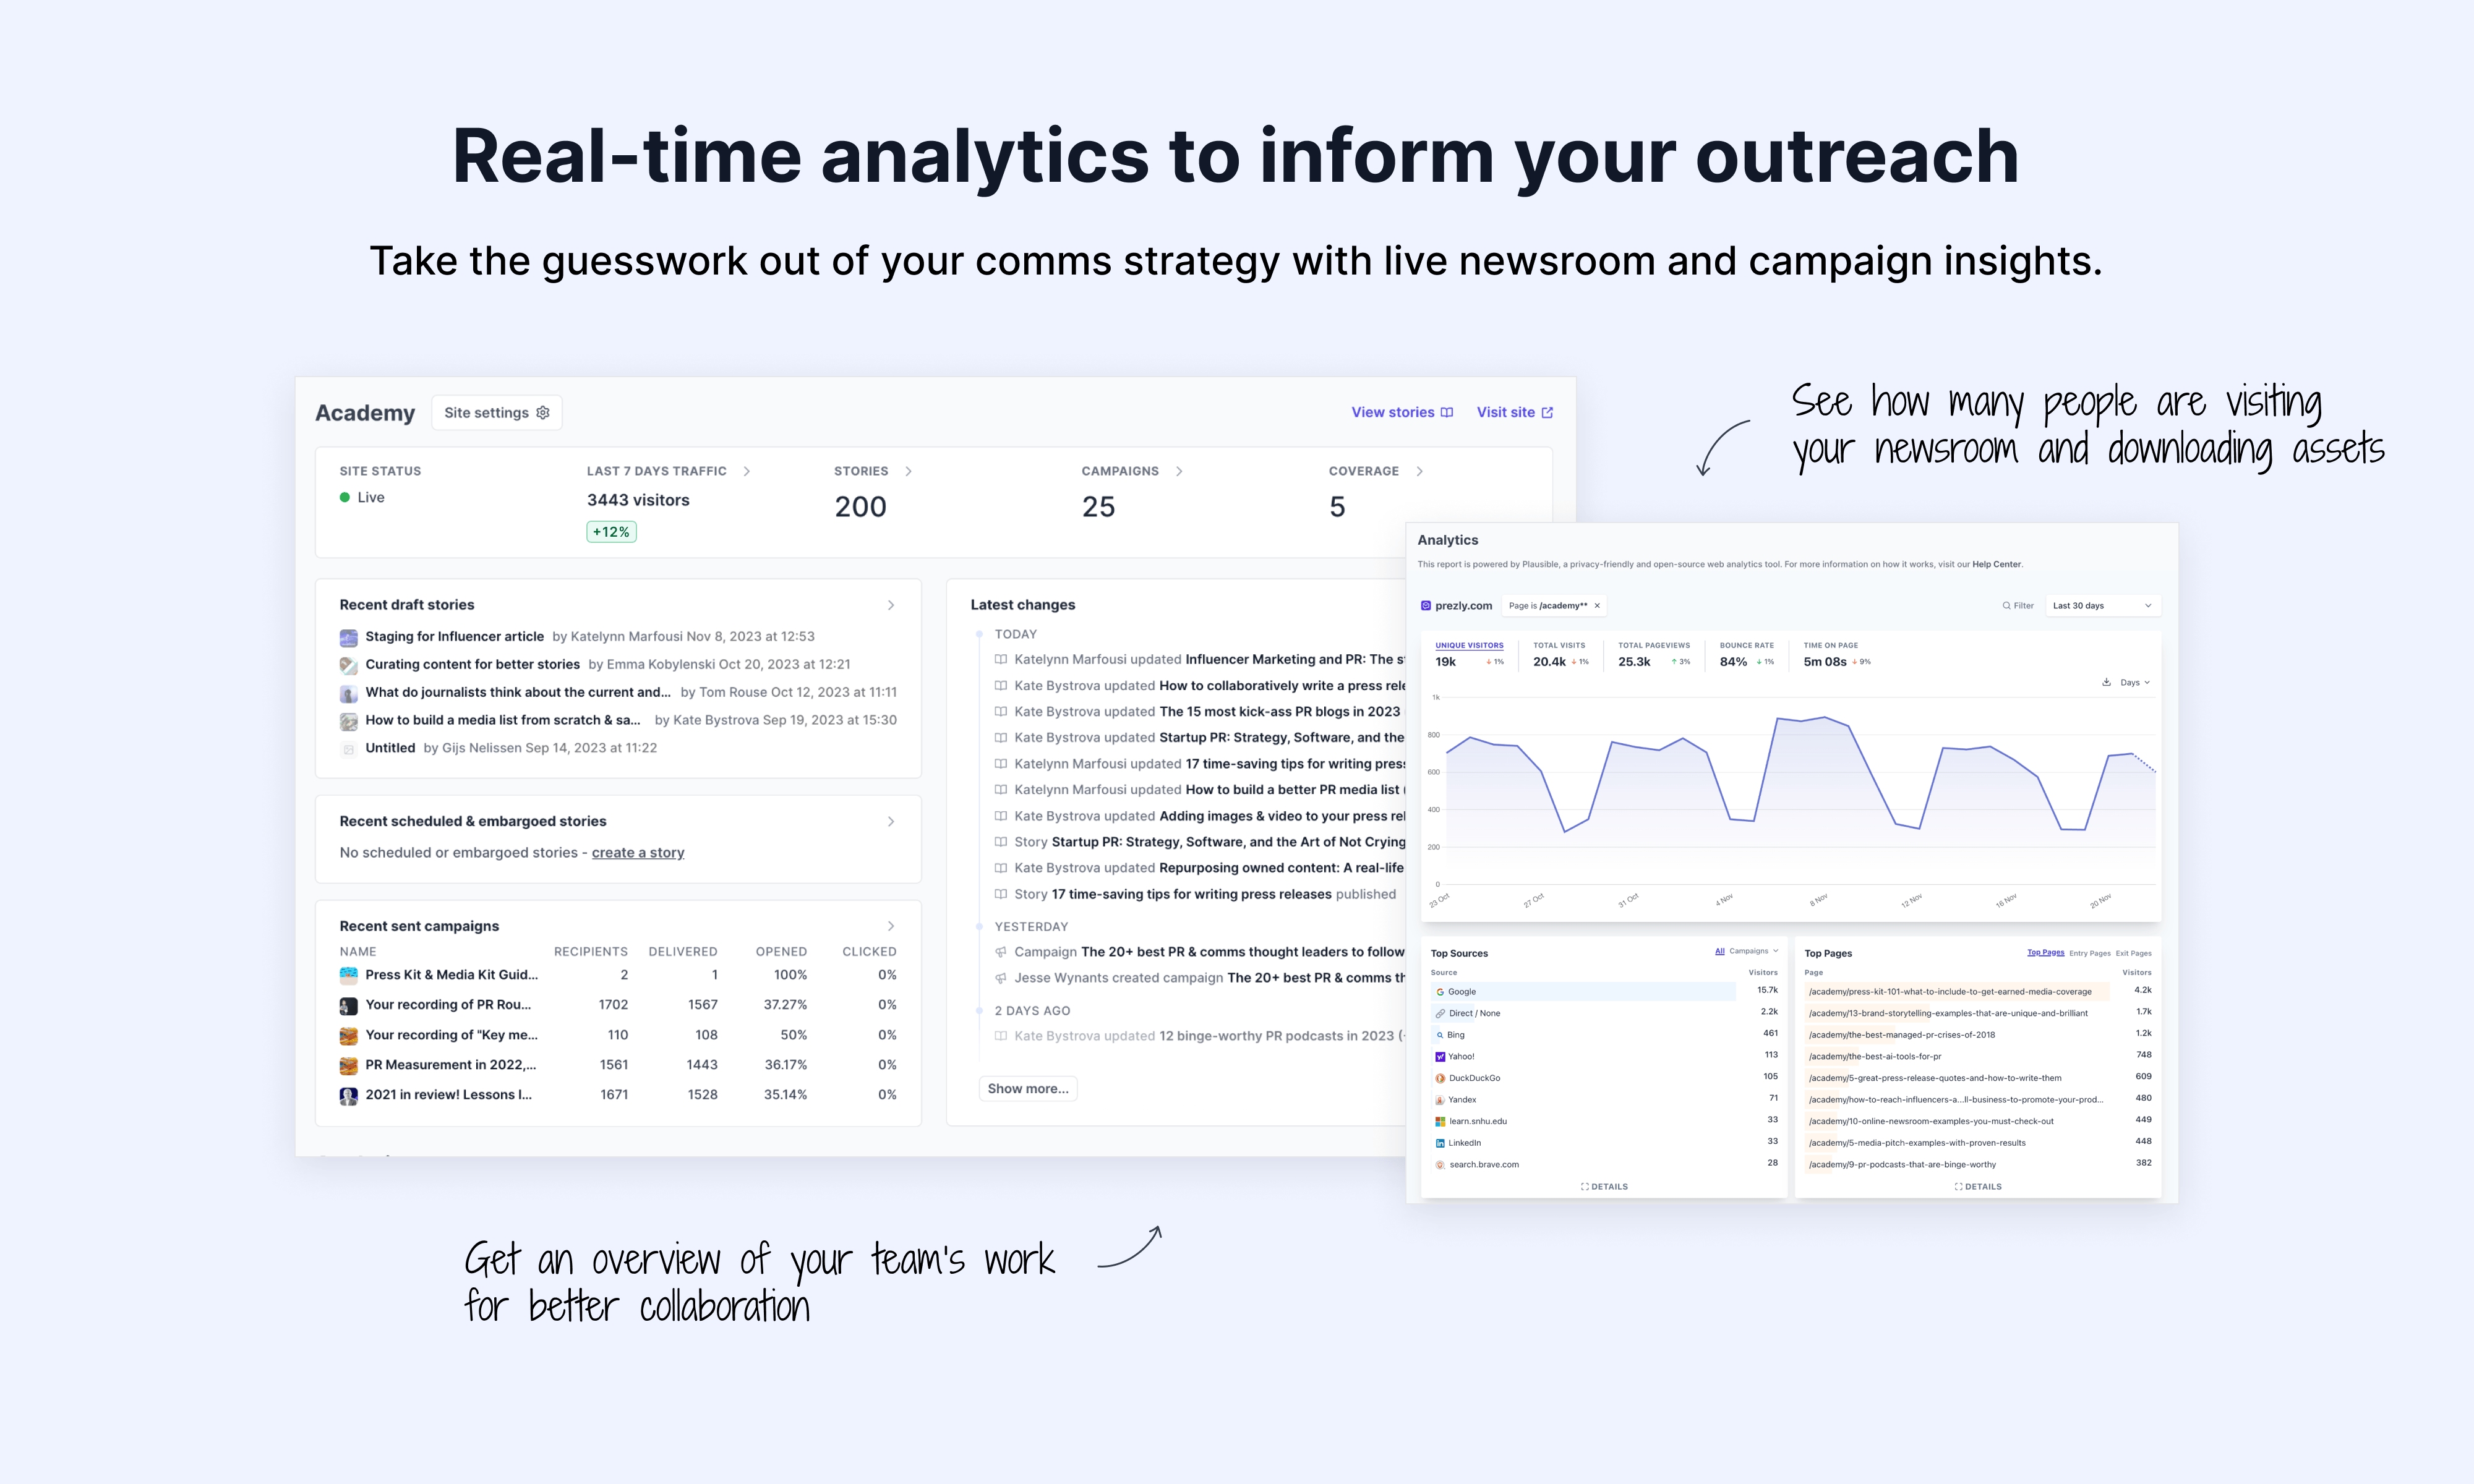 Real-time analytics to inform your outreach - take the guesswork out of your comms strategy with live newsroom and campaign insights. 